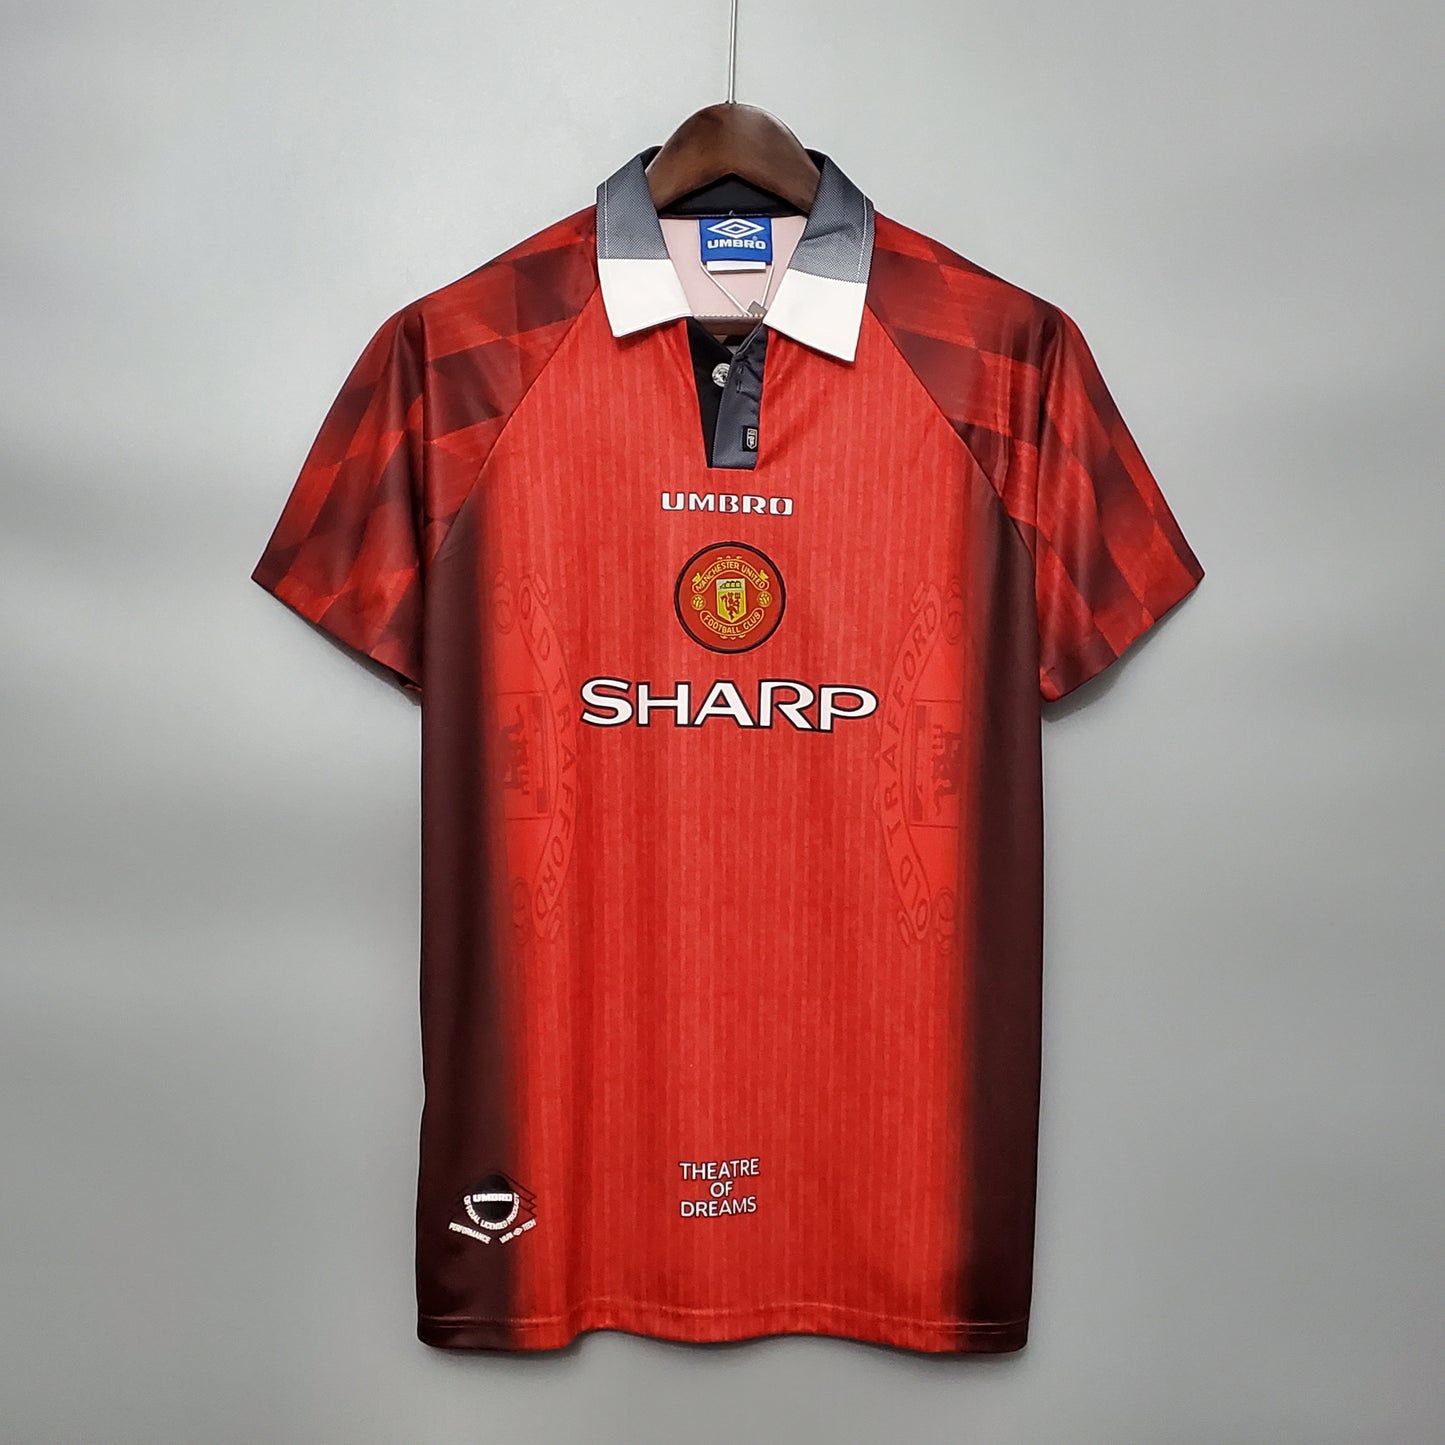 1996/97 Manchester United Home Shirt